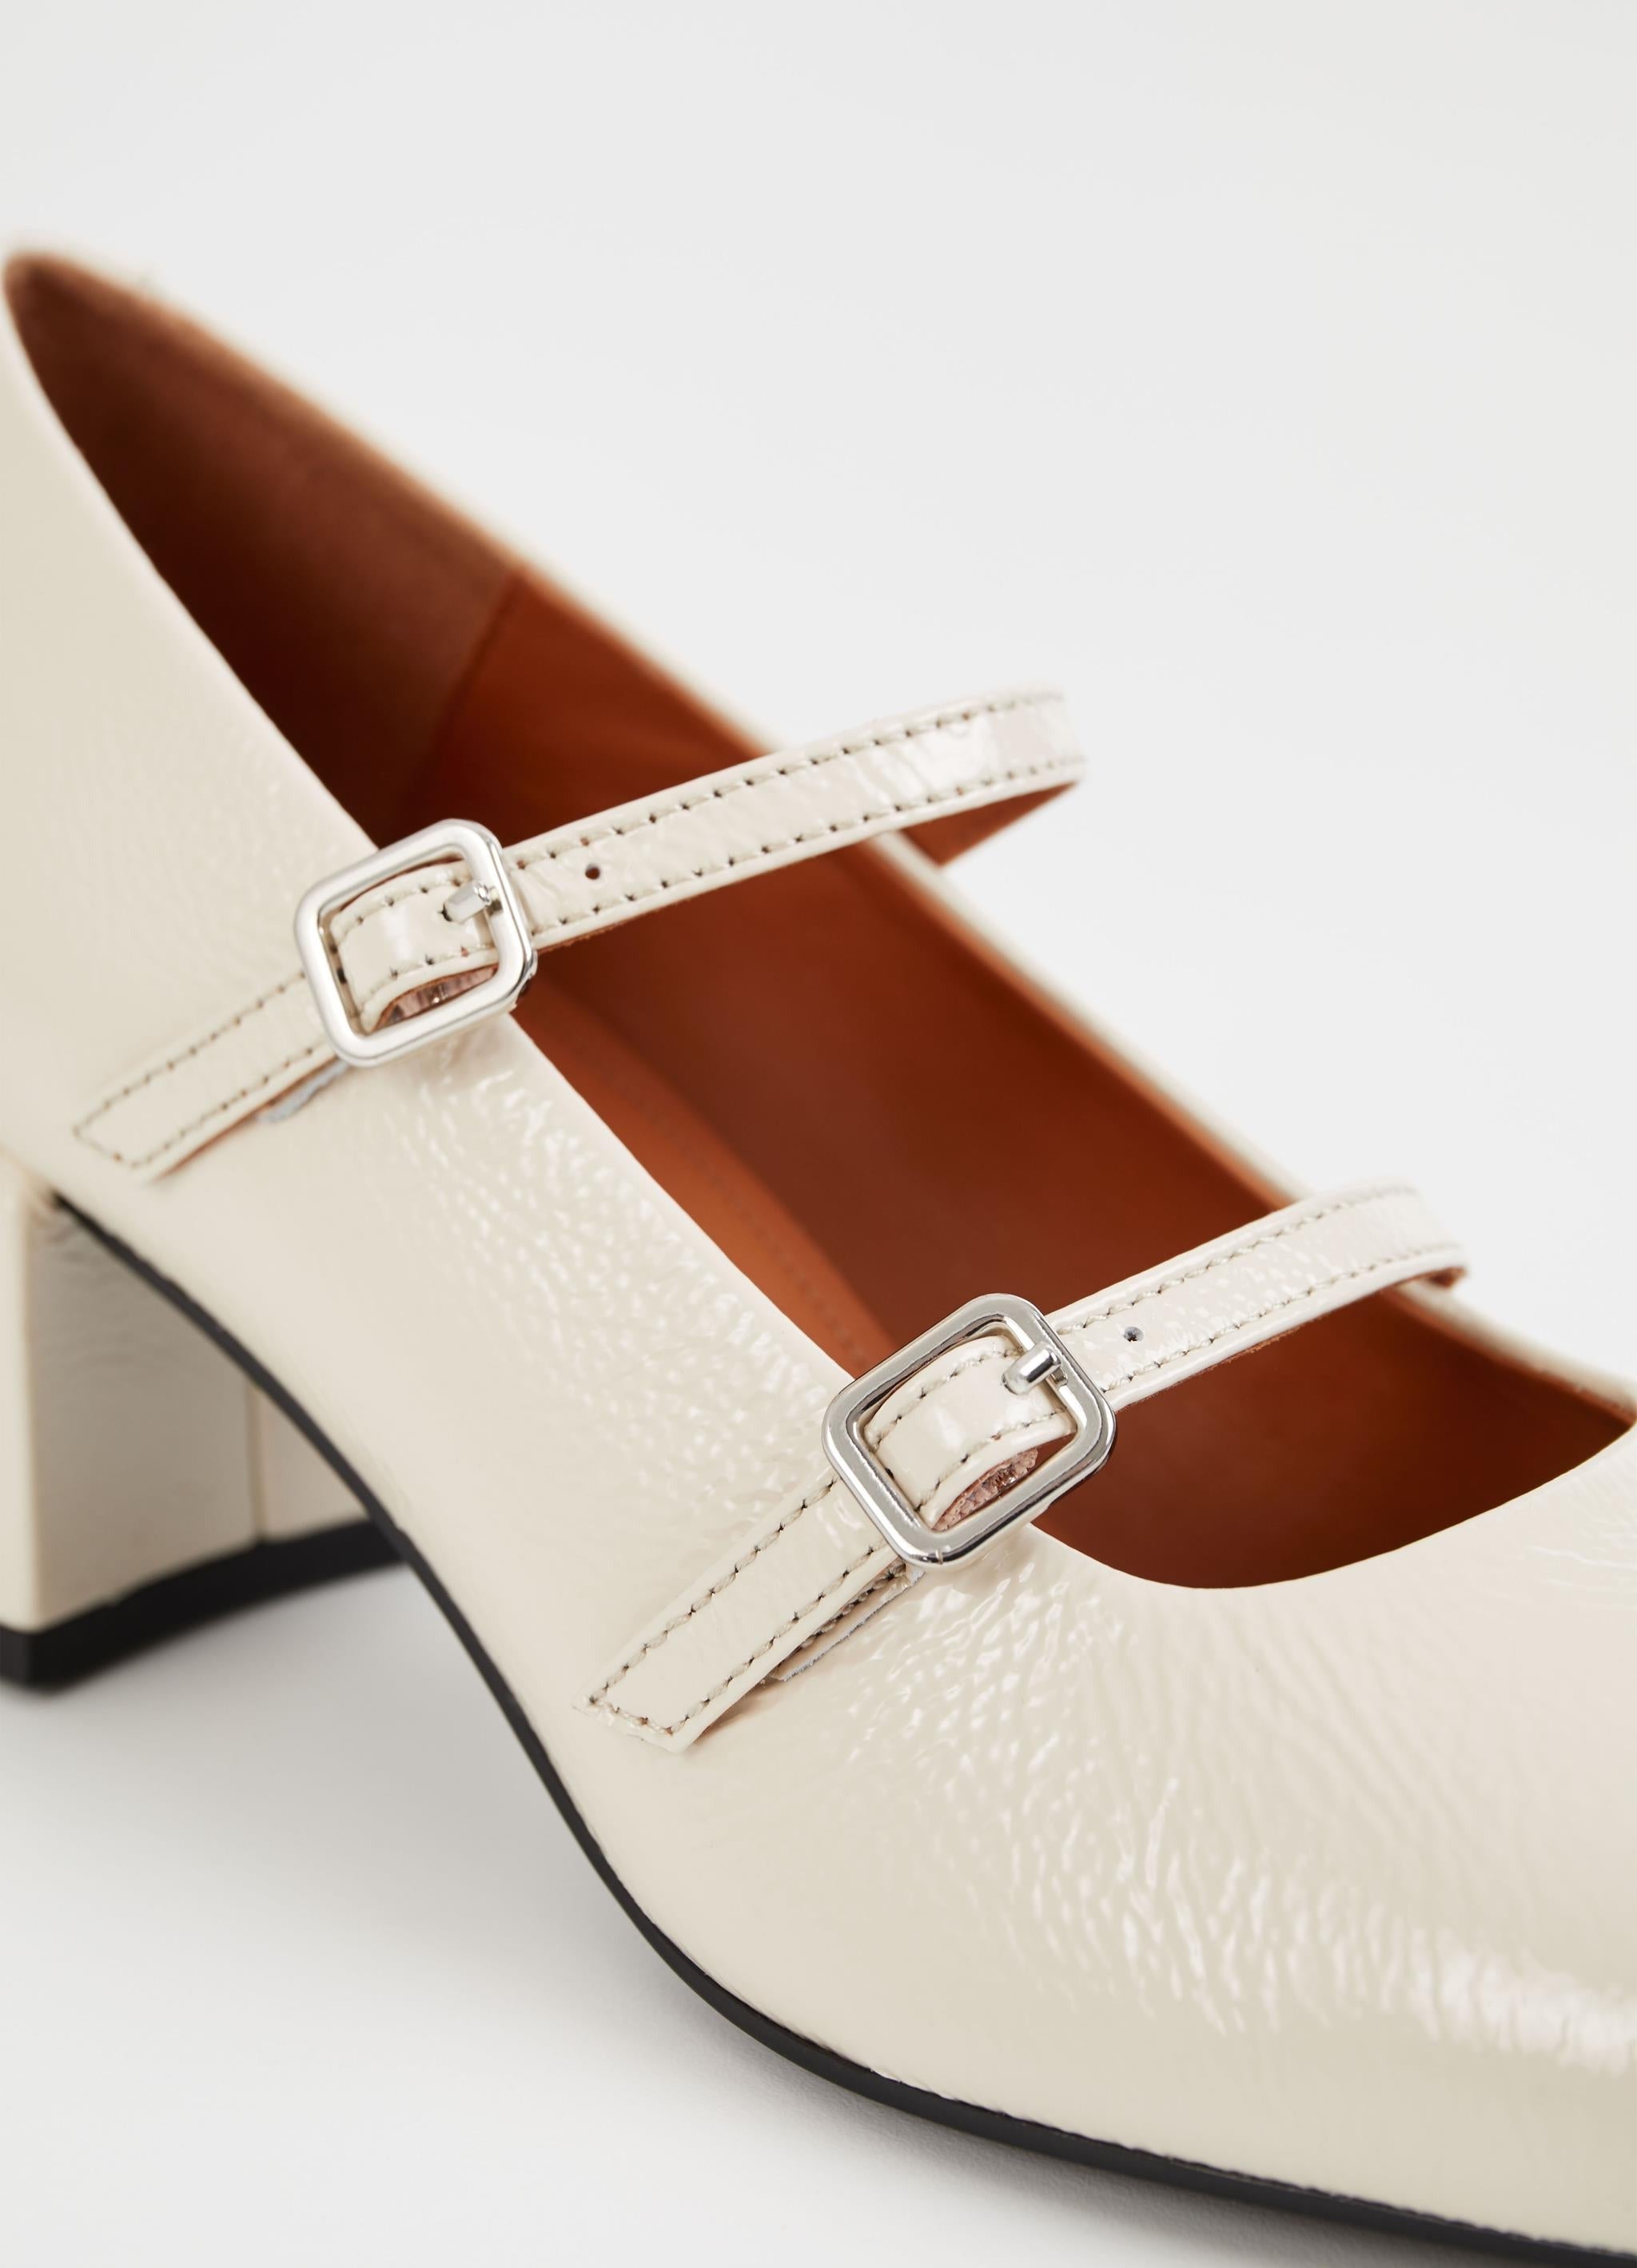 Cream patent mary jane style shoes with block heel and double thin strap